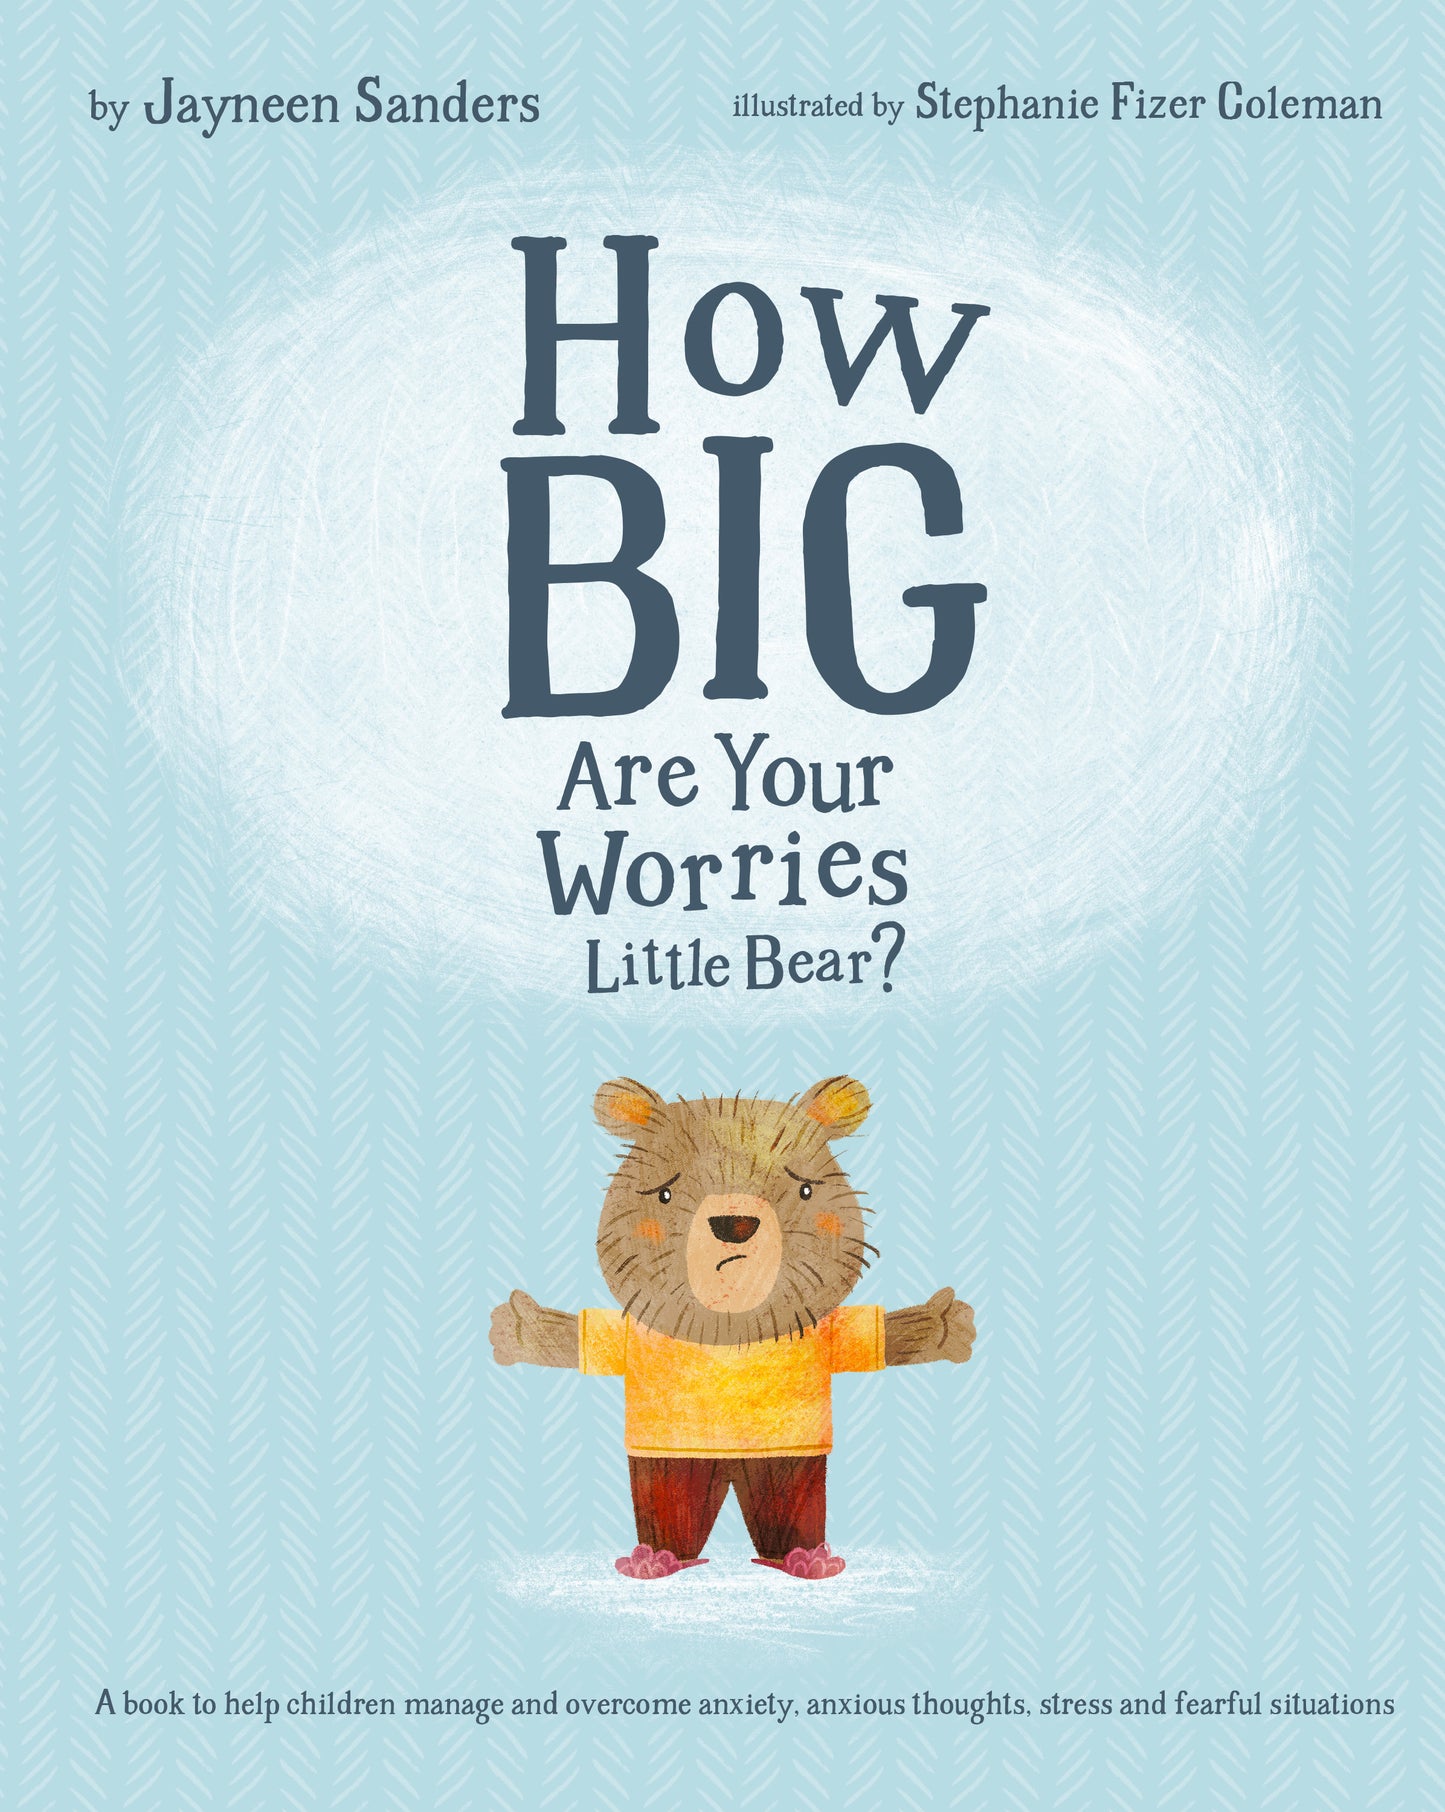 The cover of the book ‘How Big Are Your Worries Little Bear?’ by Jayneen Sanders.